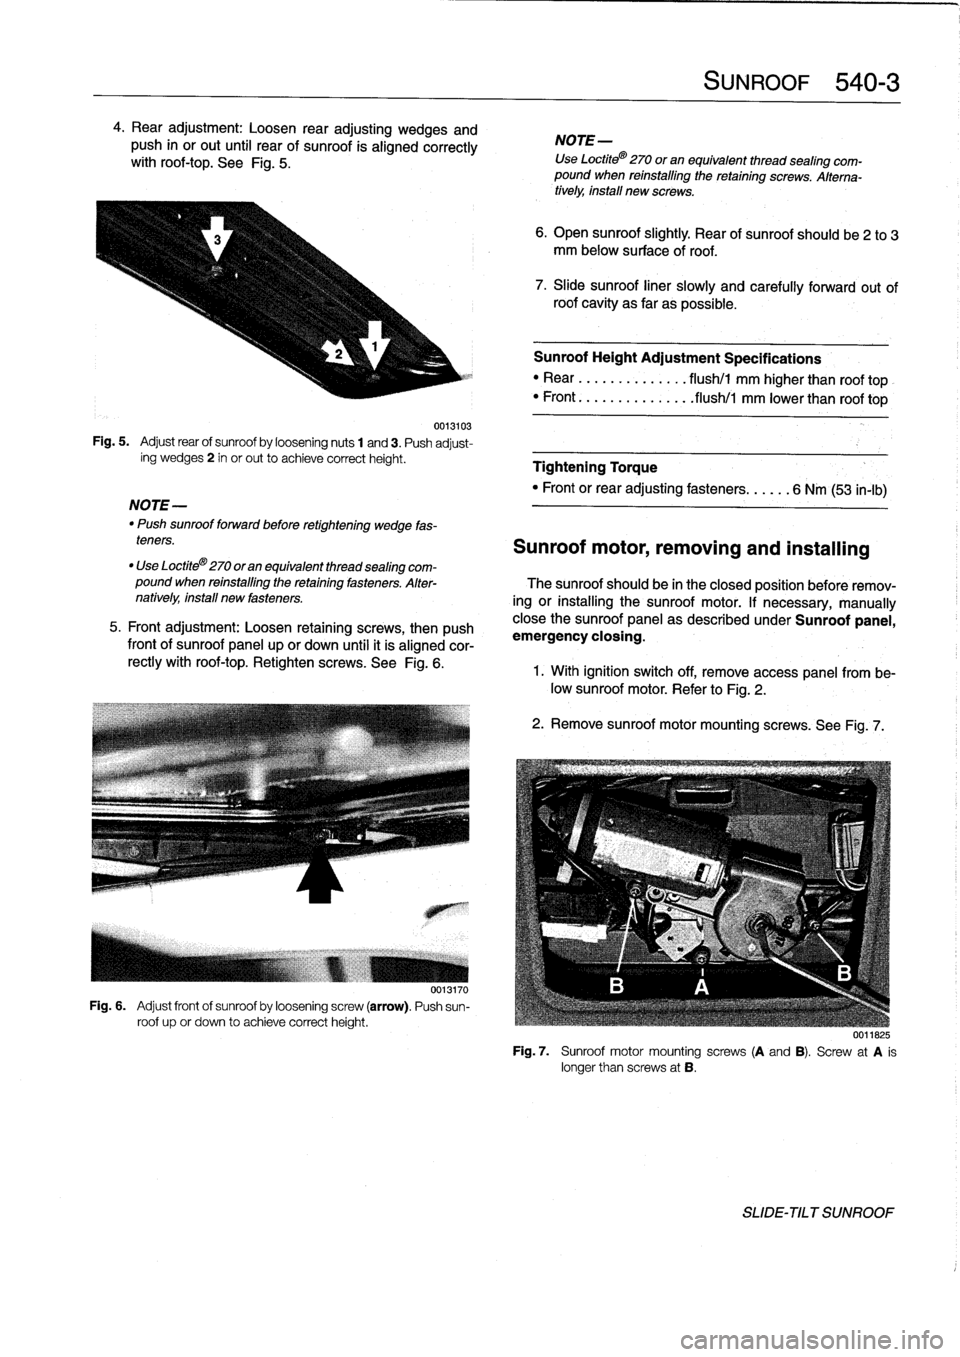 BMW 318i 1995 E36 Workshop Manual 4
.
Rear
adjustment
:
Loosen
rear
adjusting
wedges
and
push
in
or
out
until
rear
of
sunroof
is
aligned
correctly
withroof-top
.
See
Fig
.
5
.

0013103
Fig
.
5
.

	

Adjust
rear
of
sunroof
by
loosening